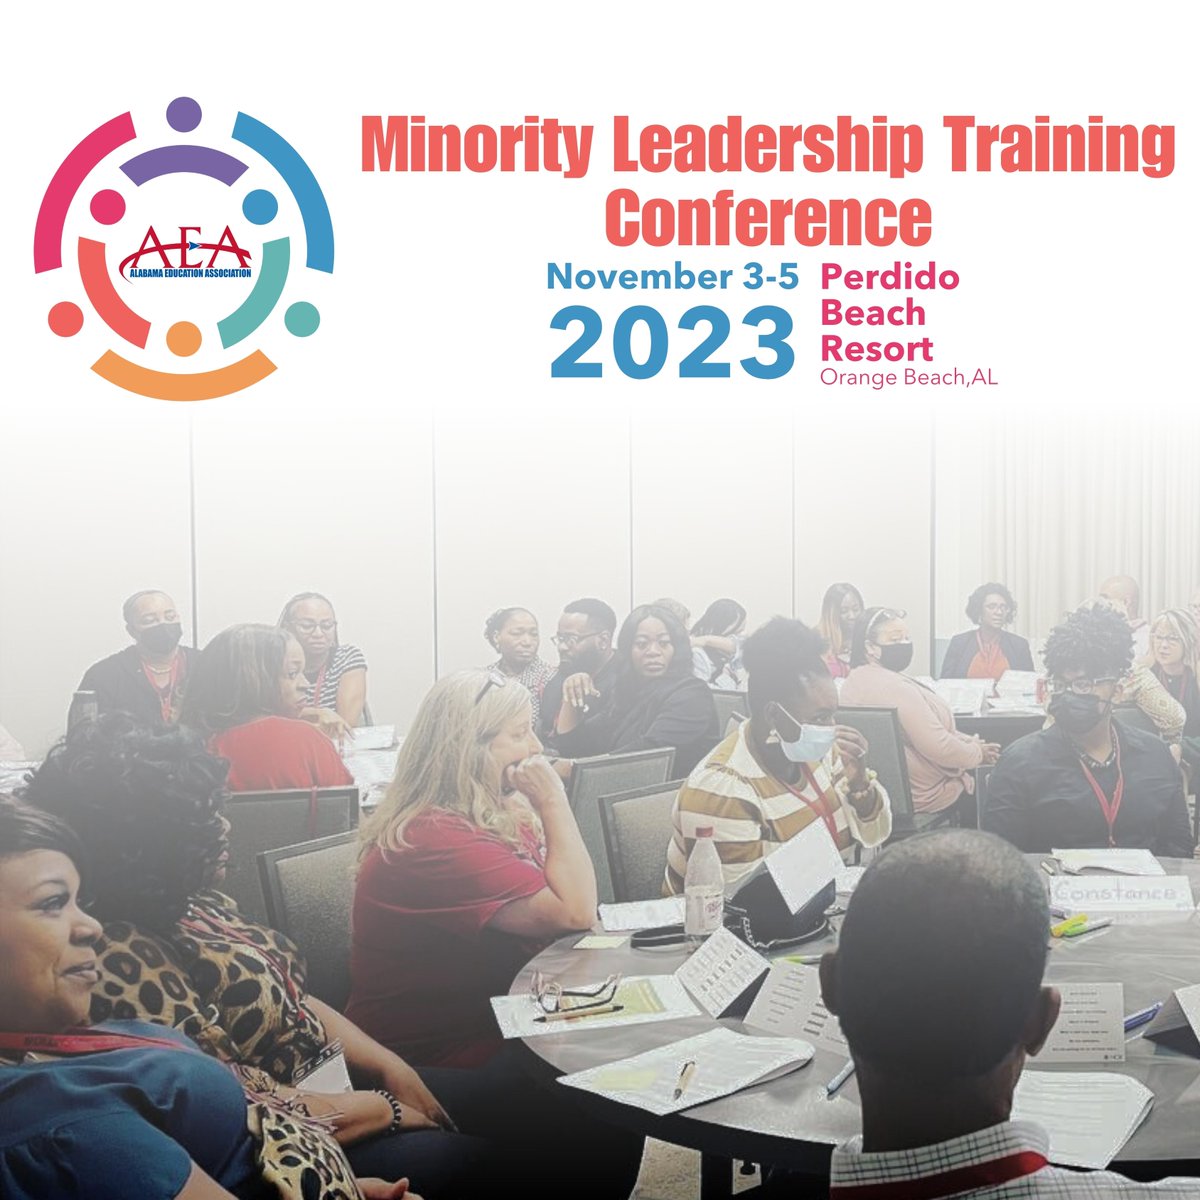 Register today for the Minority Leadership Training (MLT) Conference! The registration fee is $50 for AEA members and $250 for non-members. After October 31, the registration fee is $100, and is only available on-site. For more information, visit myAEA.org! #myAEA